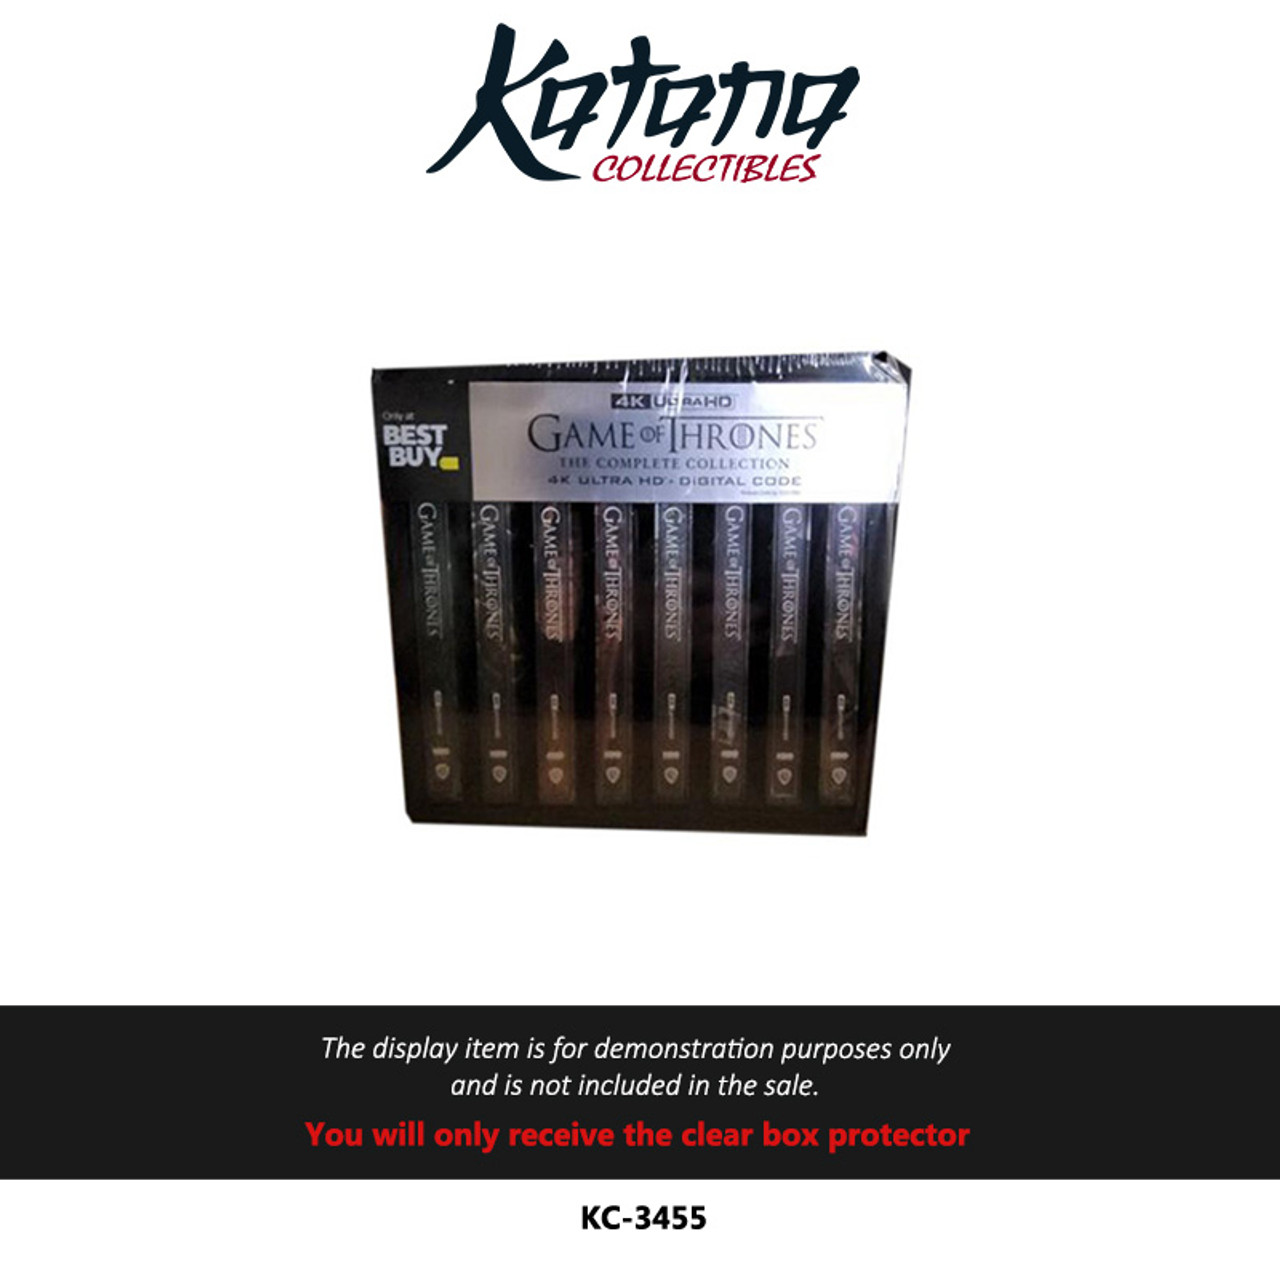 Katana Collectibles Protector For Game of Thrones 4k Steelbook Box Set Best Buy Exclusive